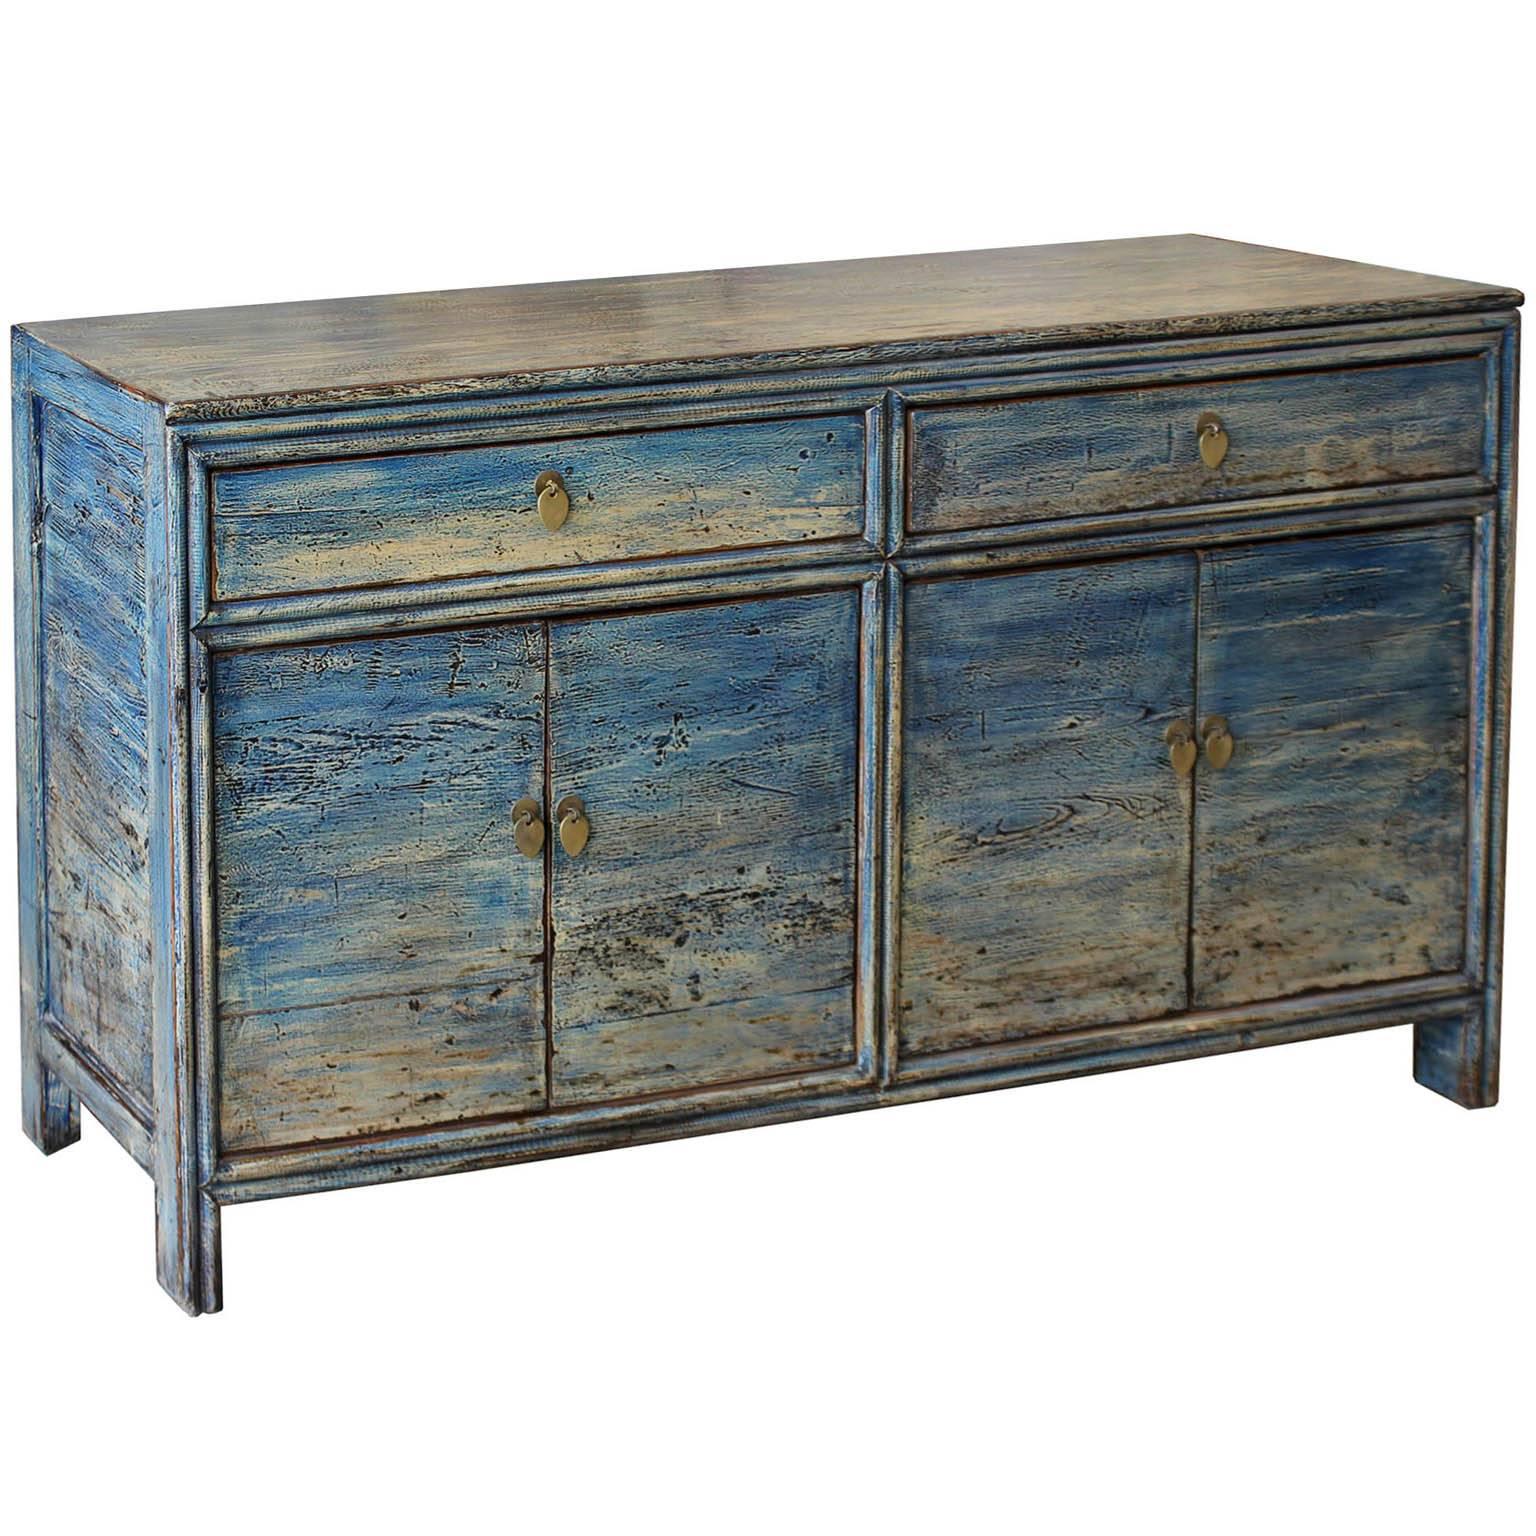 Contemporary four-door sideboard with soft blue and white marbled finished and rounded edges.